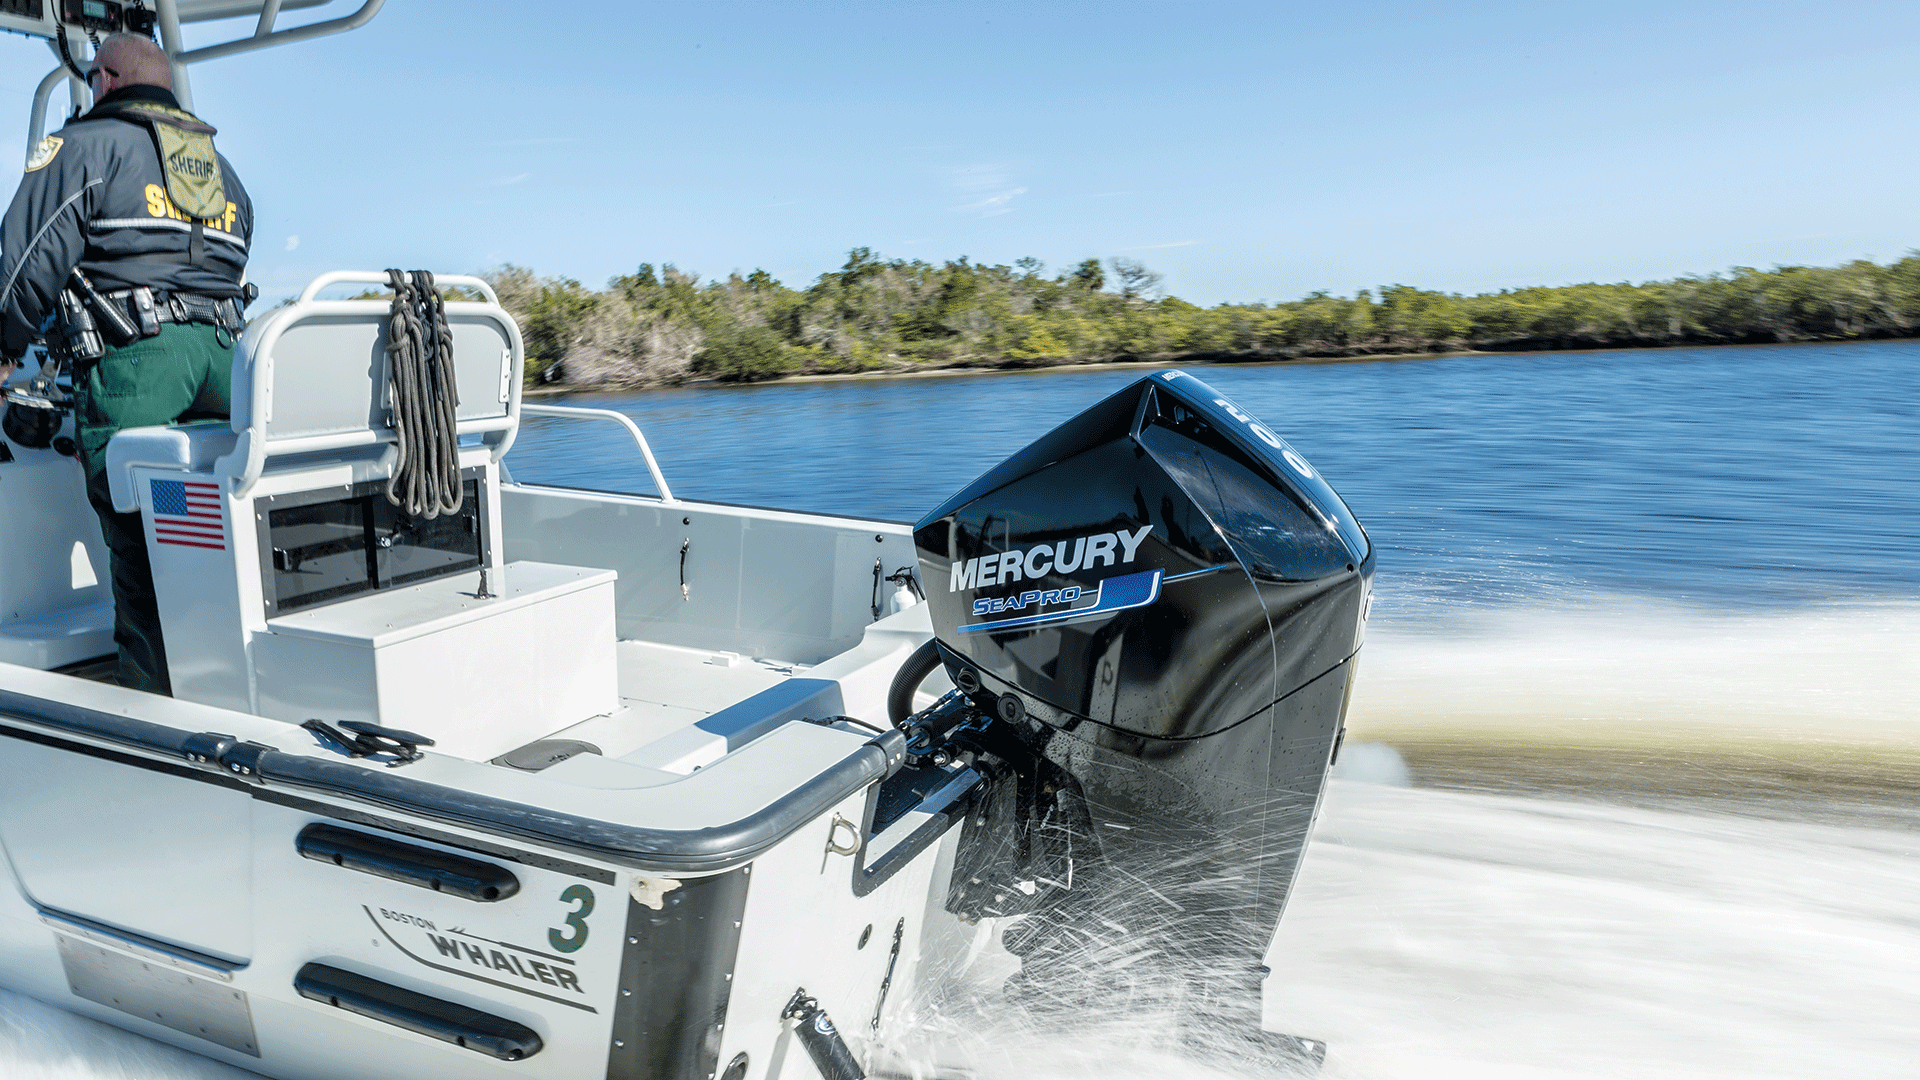 Mercury Marine manufactures virtually all of the core components for its inboard and outboard motors, such as this 200-hp SeaPro outboard shown powering a Boston Whaler.